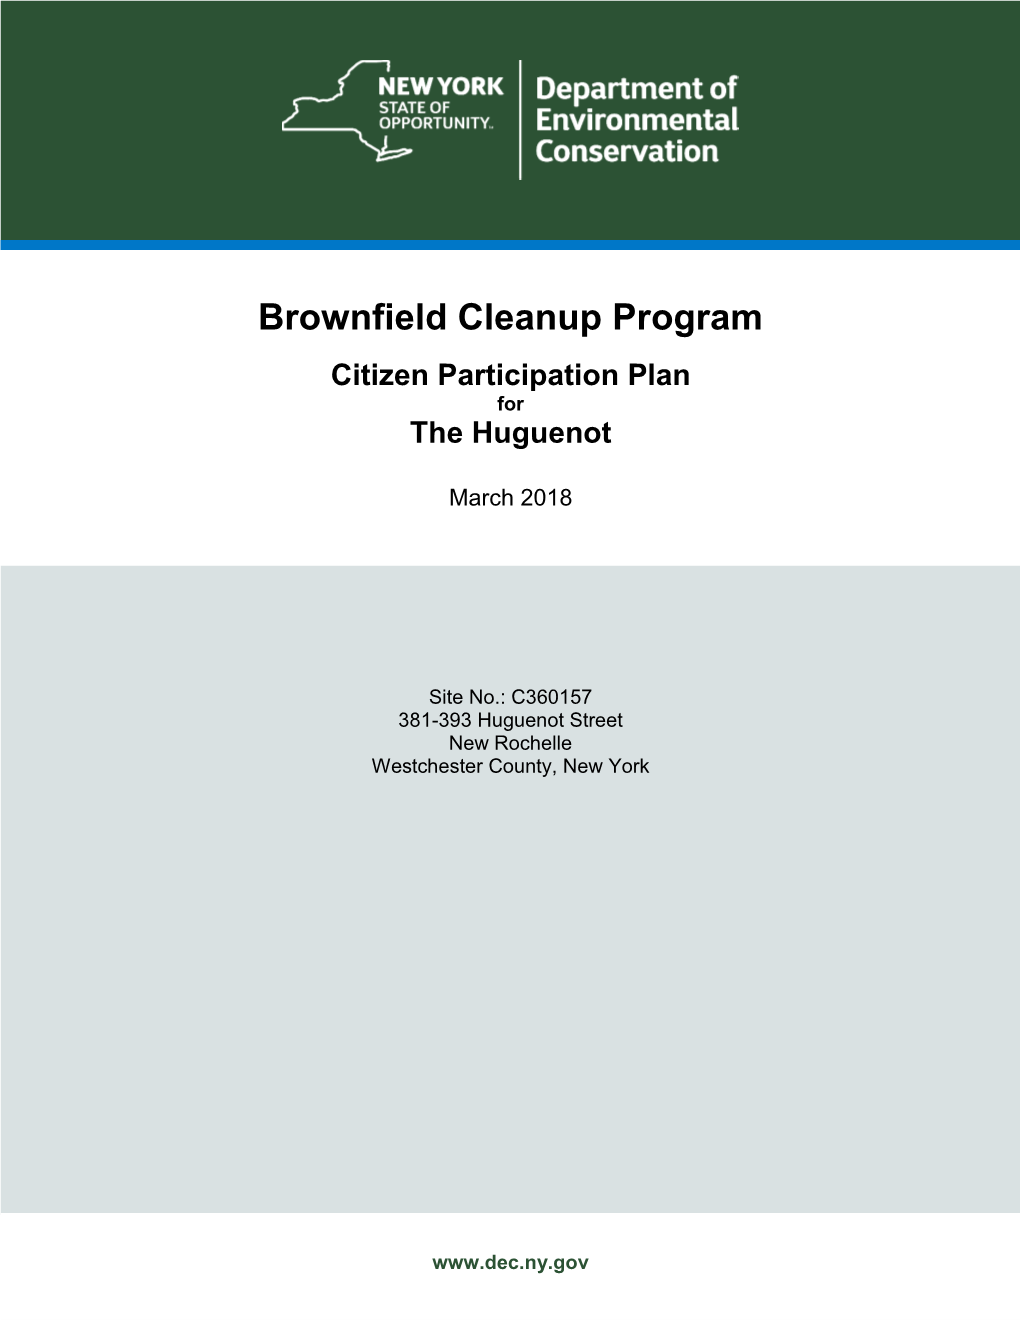 Brownfield Cleanup Program Citizen Participation Plan for the Huguenot